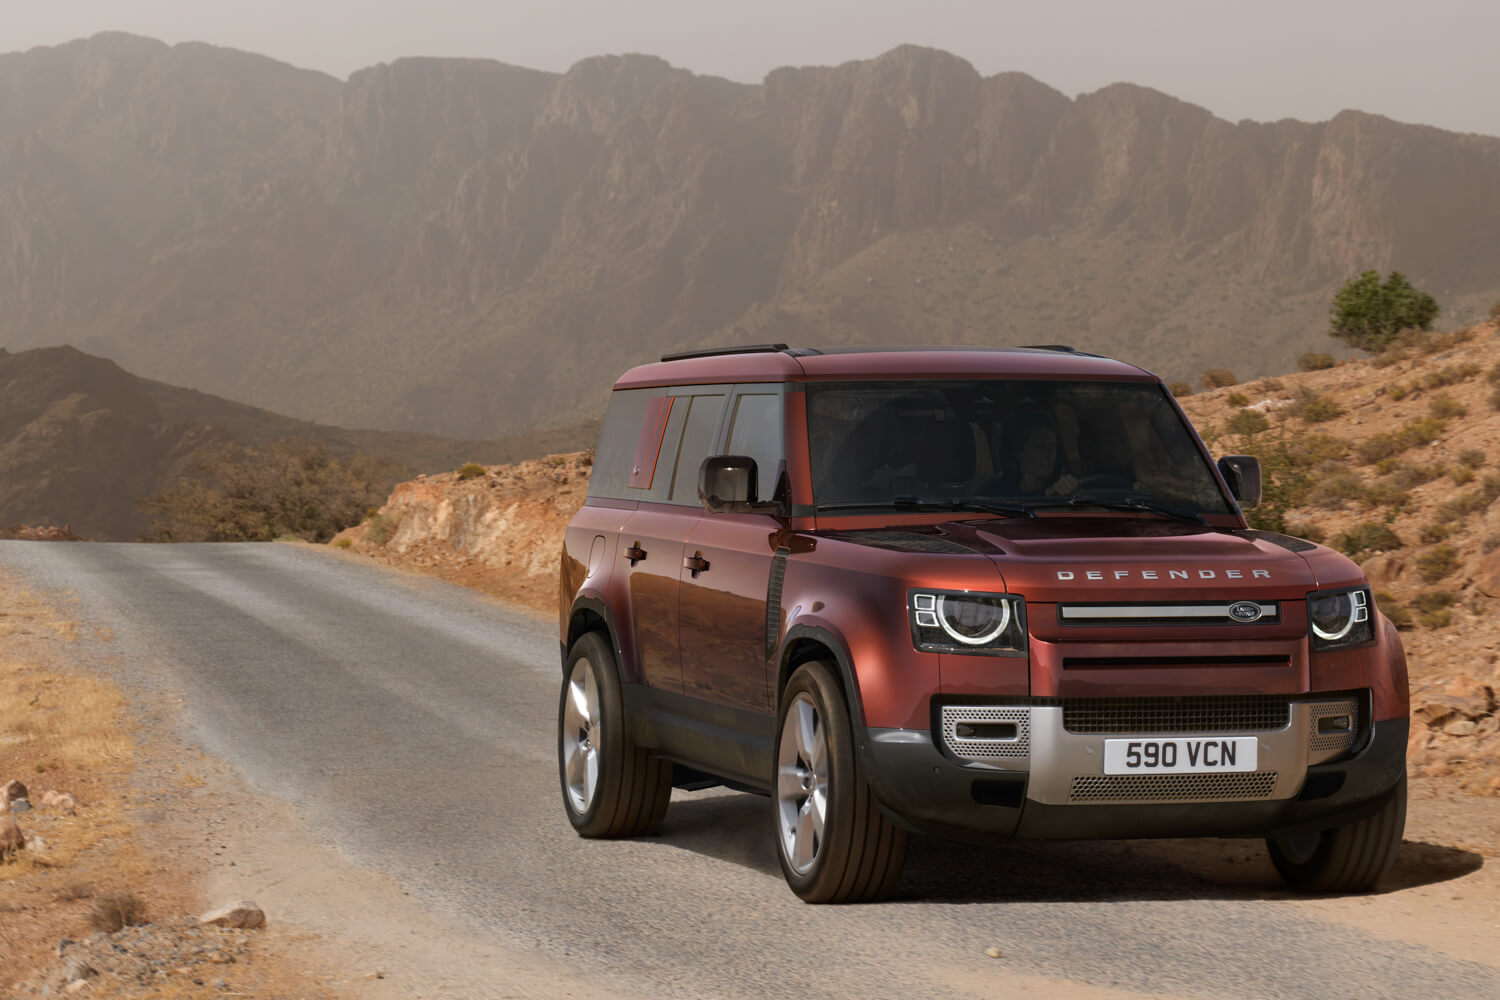 Land Rover Defender 130 gets eight seats